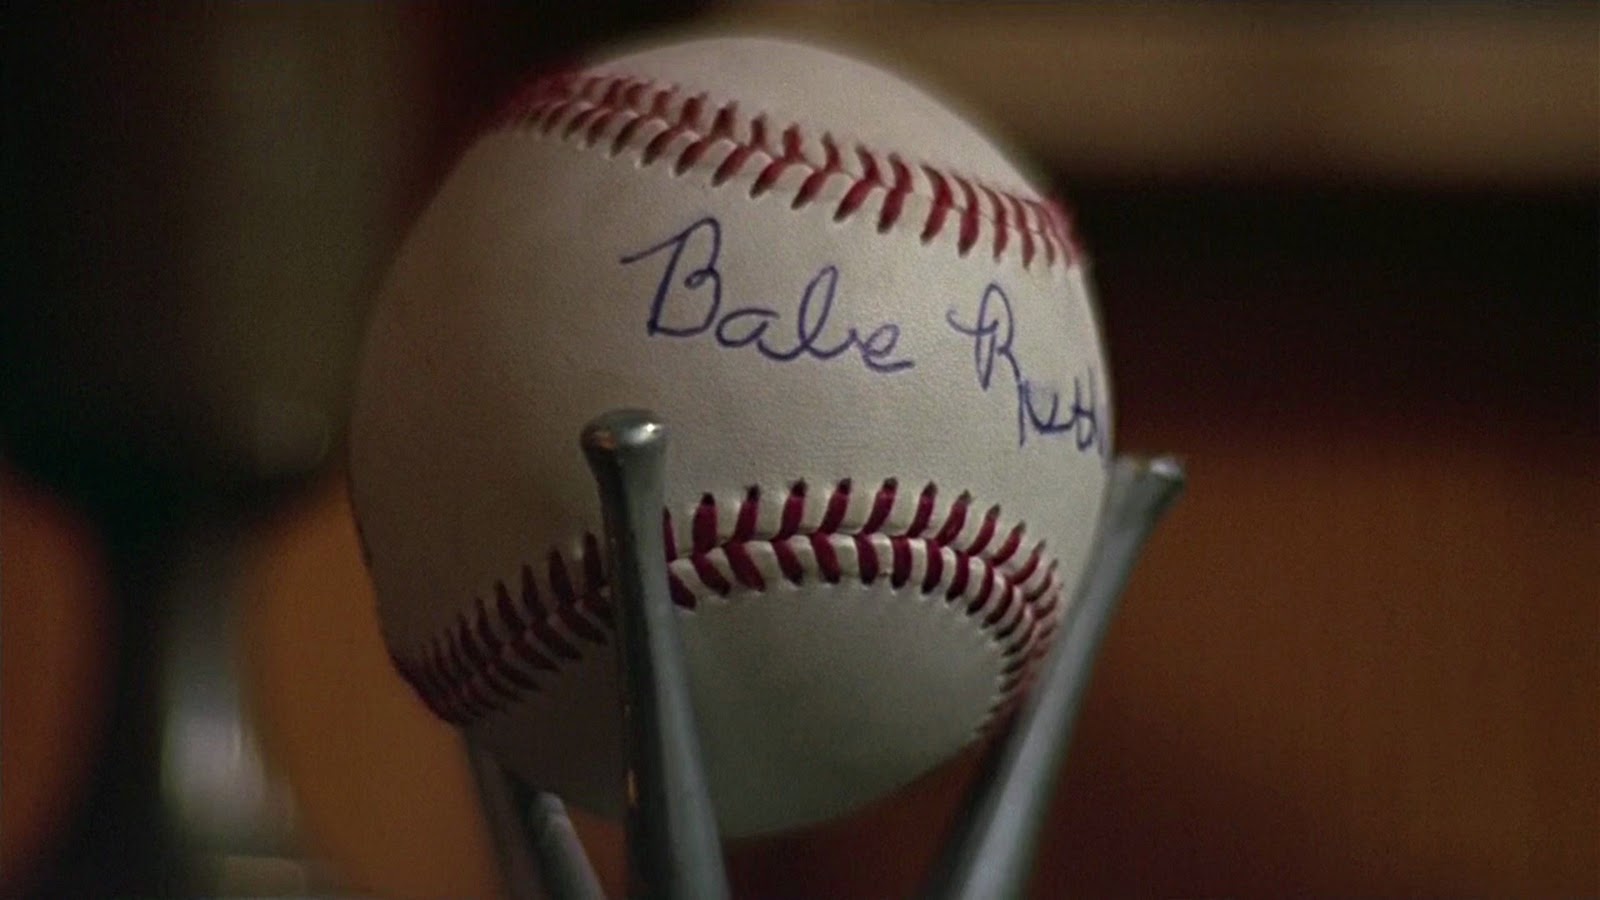 The Forged Babe Ruth Ball (from The Sandlot Movie). 